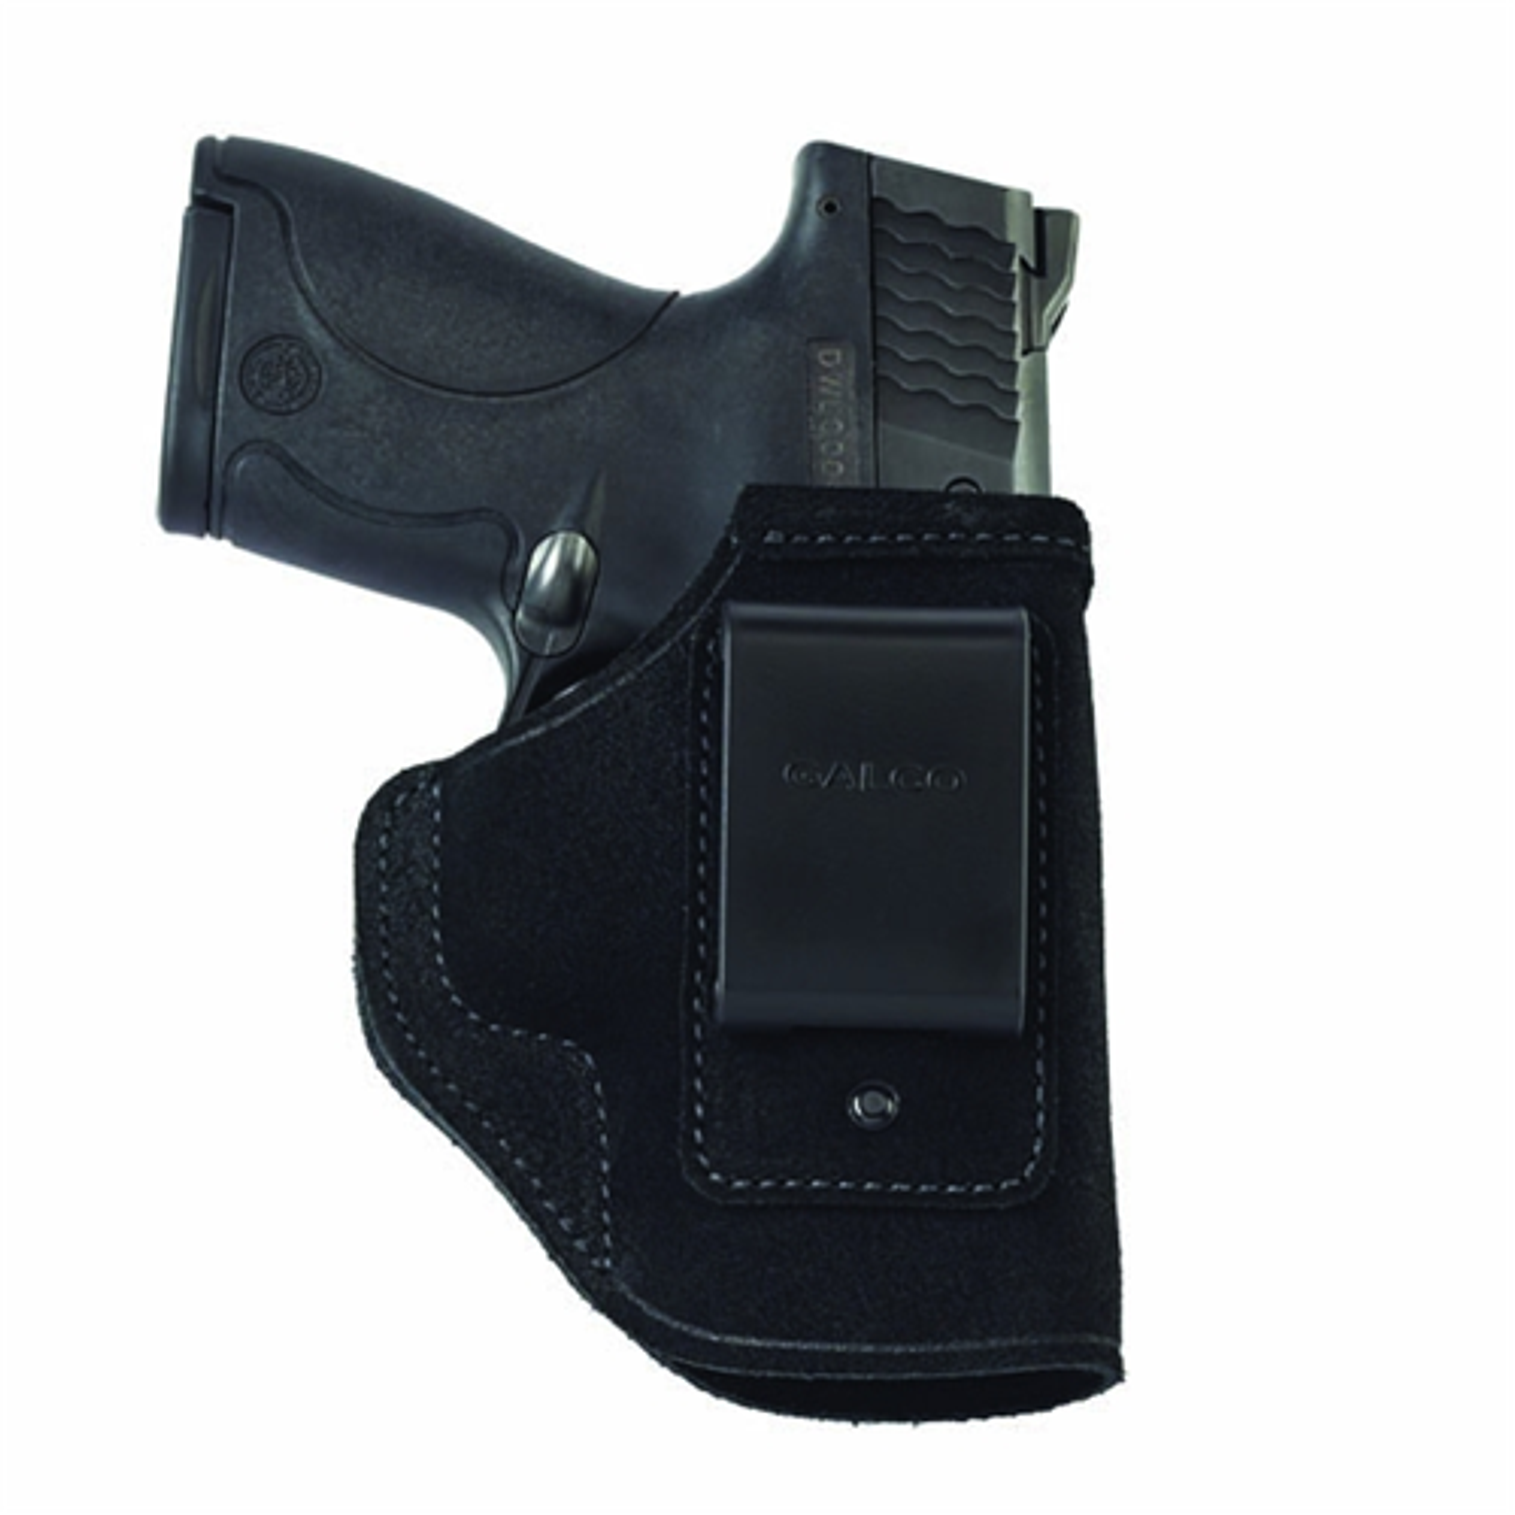 Stow-n-go Inside The Pant Holster - KRGAL-STO424B